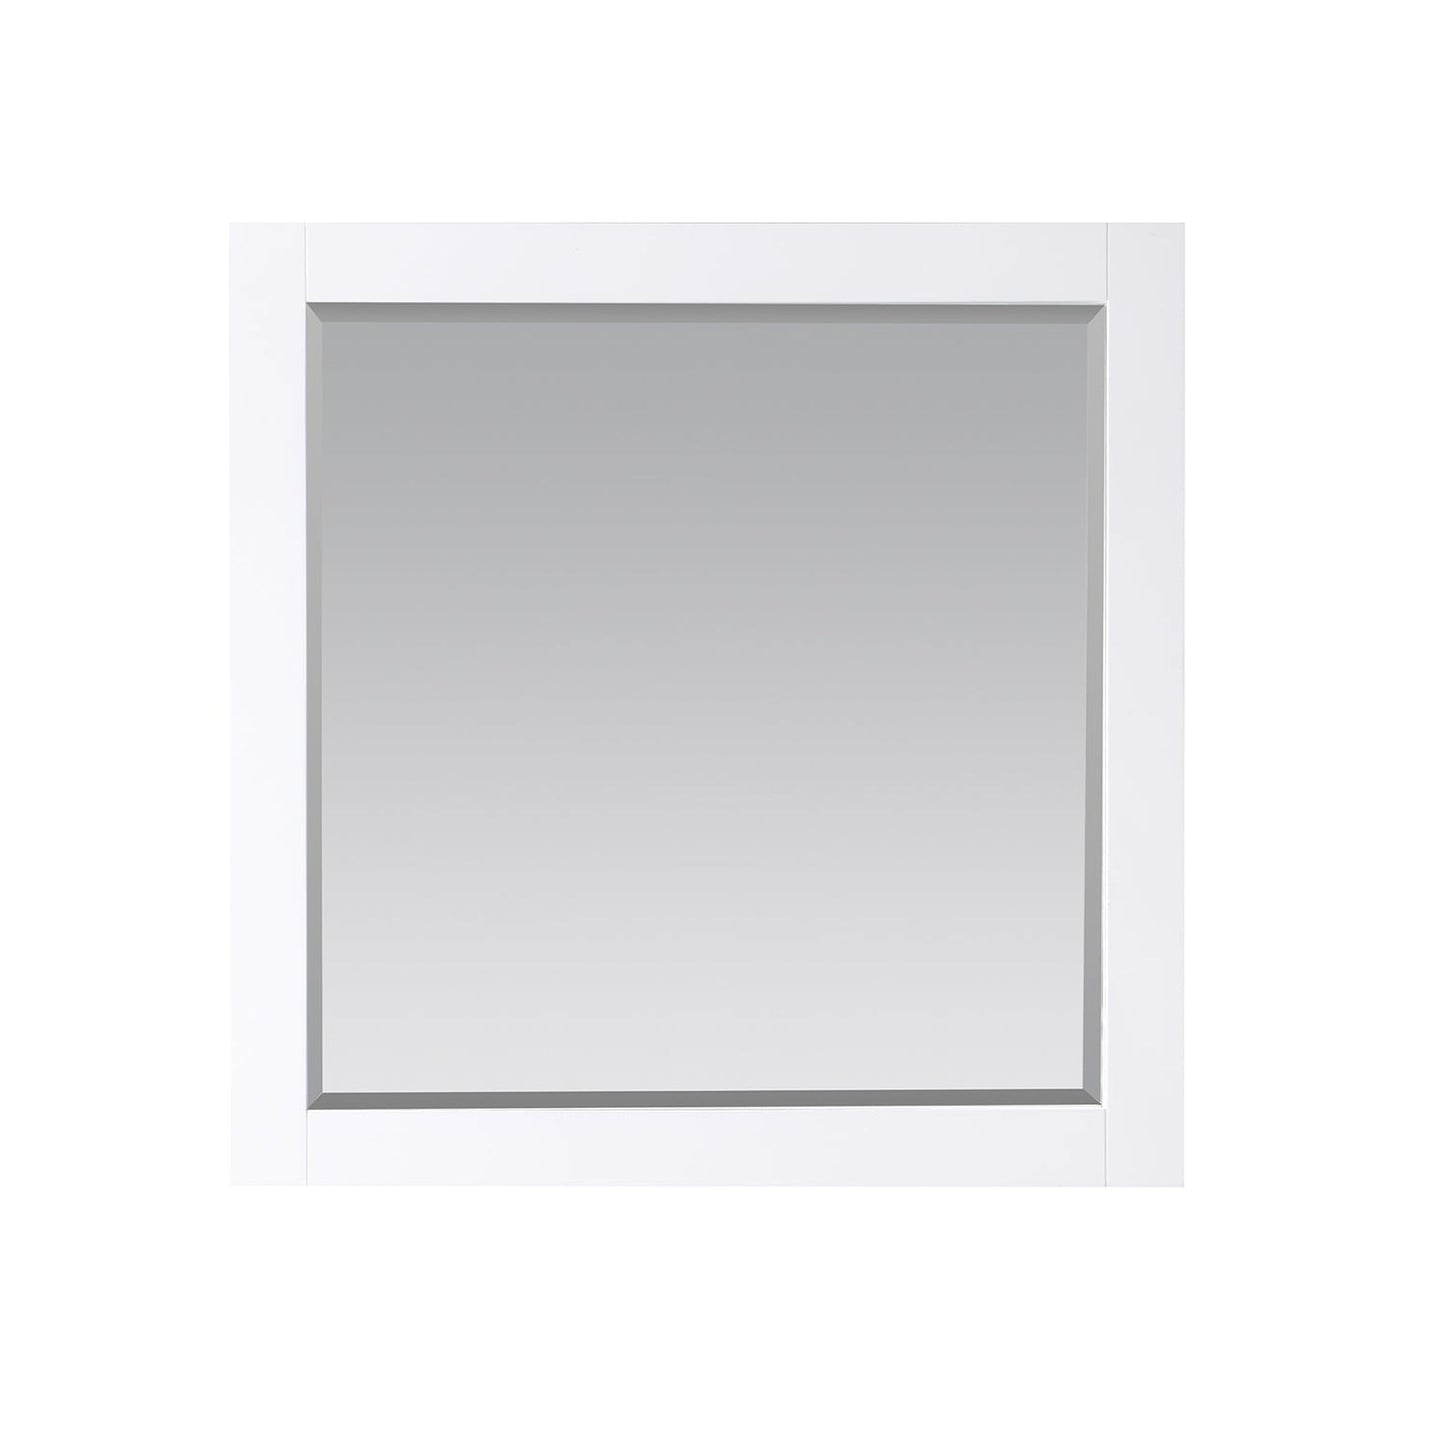 Altair Maribella 33.5" x 36" Rectangle White Wood Framed Wall-Mounted Mirror